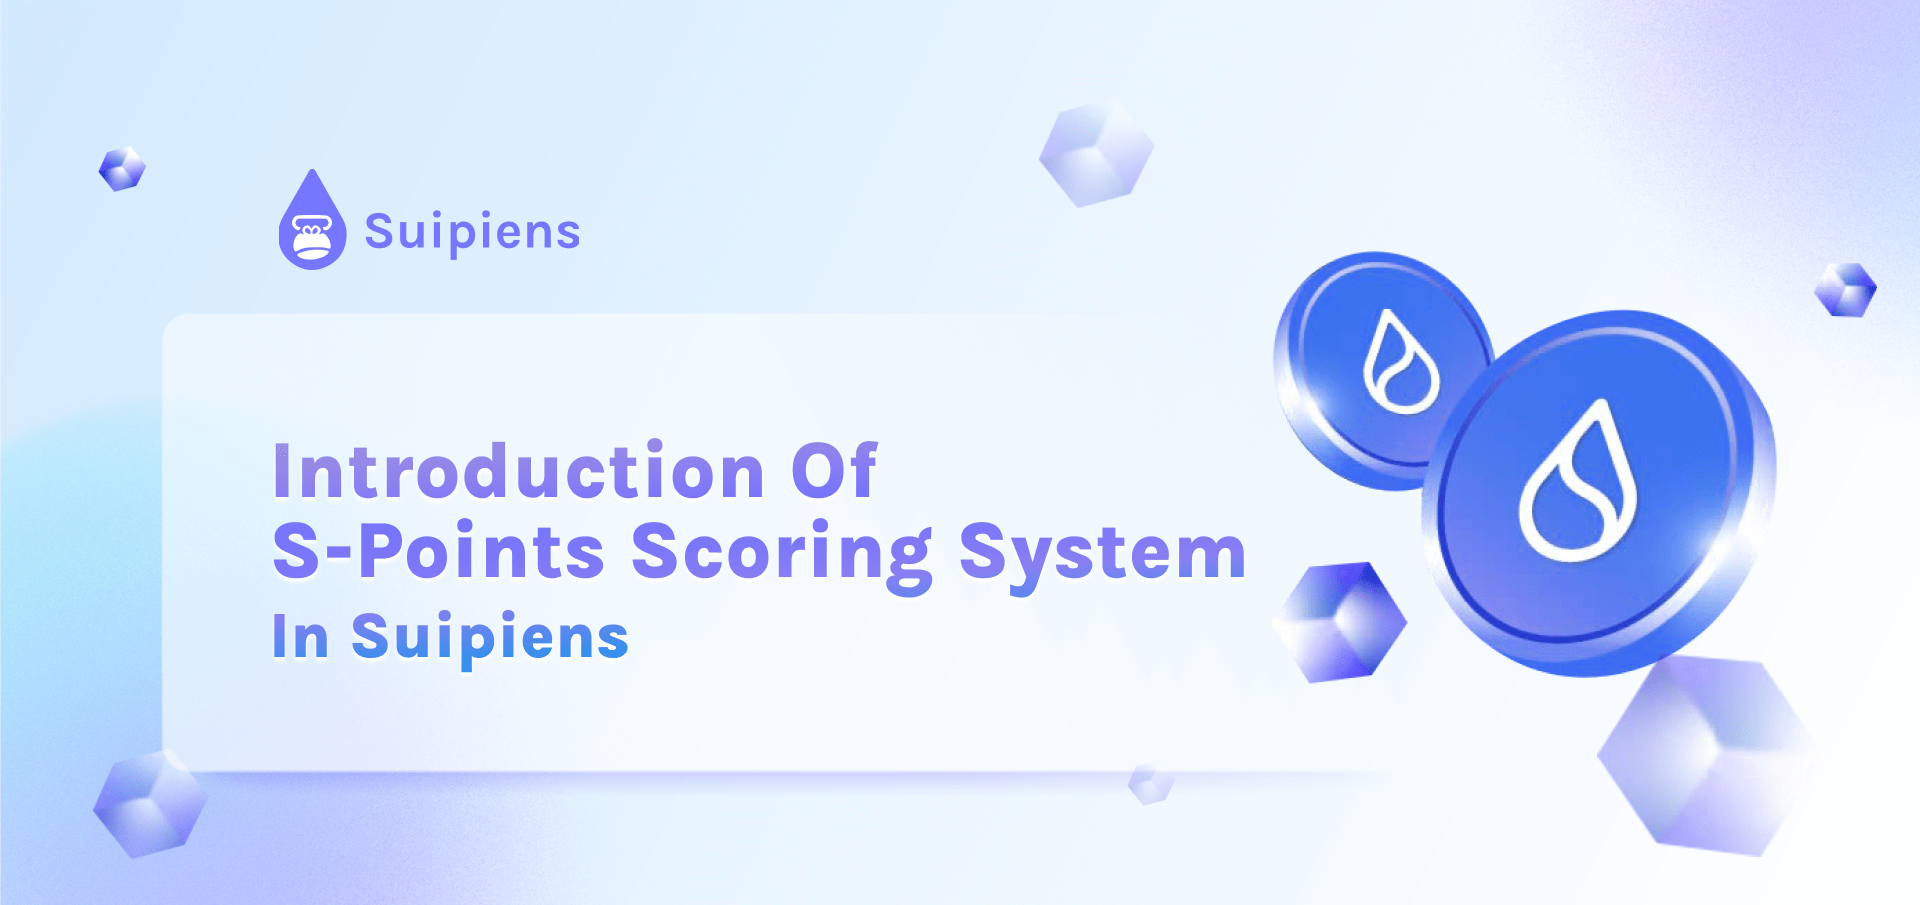 Introduction Of S-Points Scoring System In Suipiens